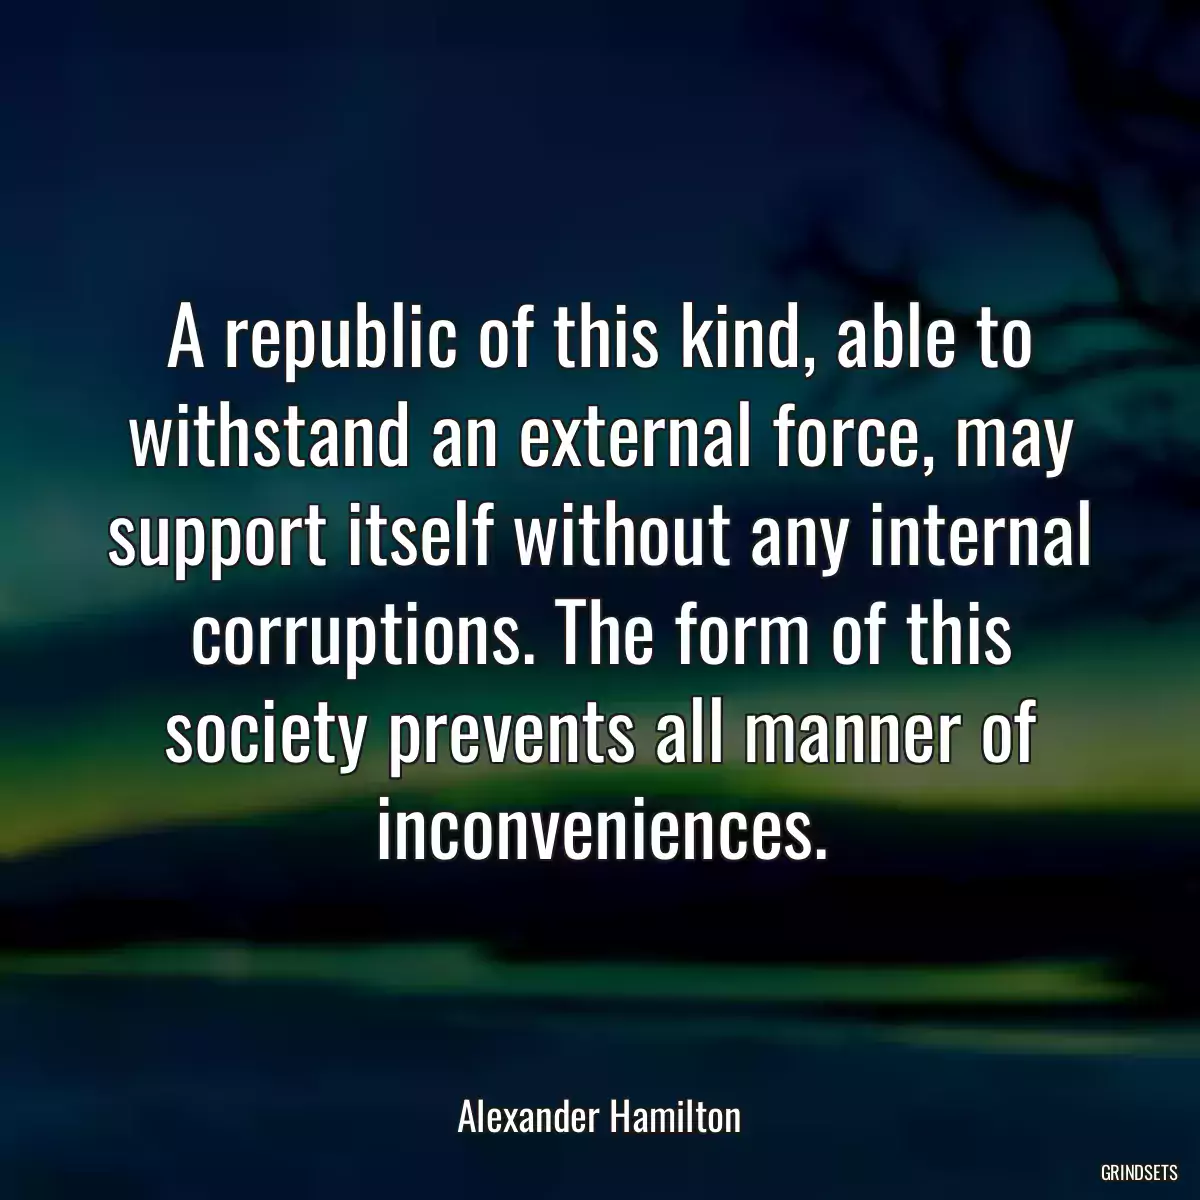 A republic of this kind, able to withstand an external force, may support itself without any internal corruptions. The form of this society prevents all manner of inconveniences.